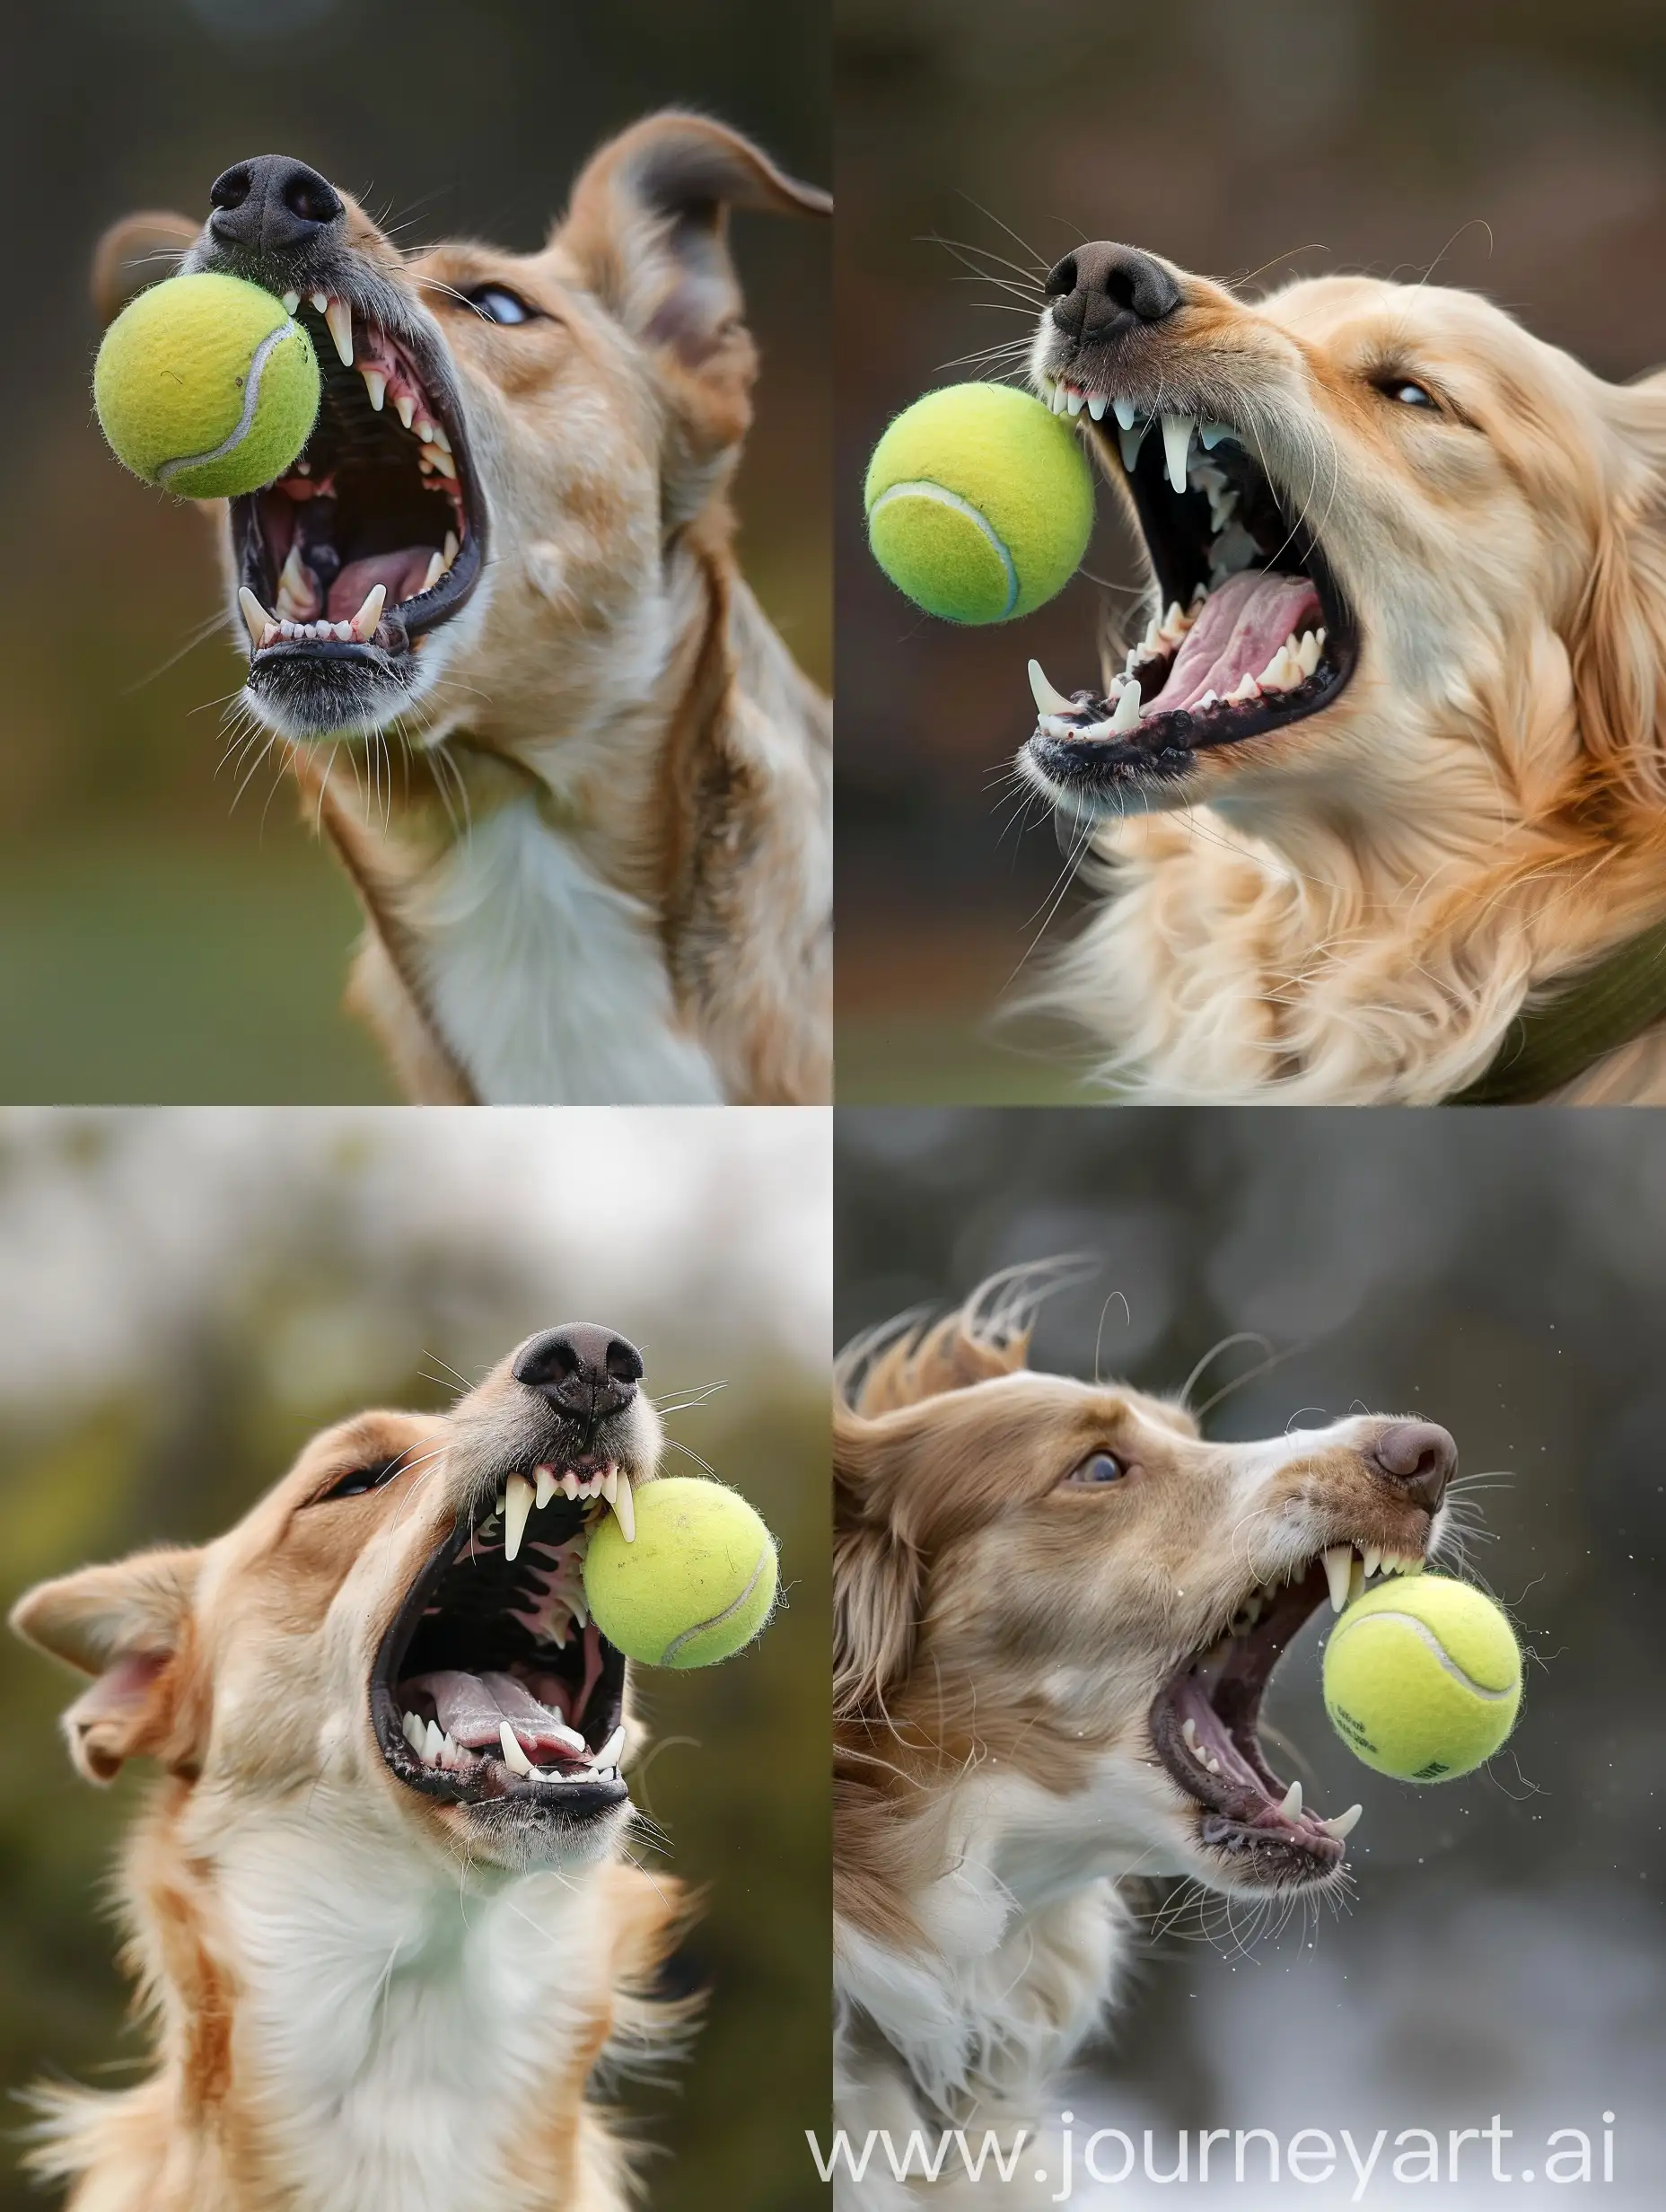 Energetic-Dog-Catching-Tennis-Ball-in-Action